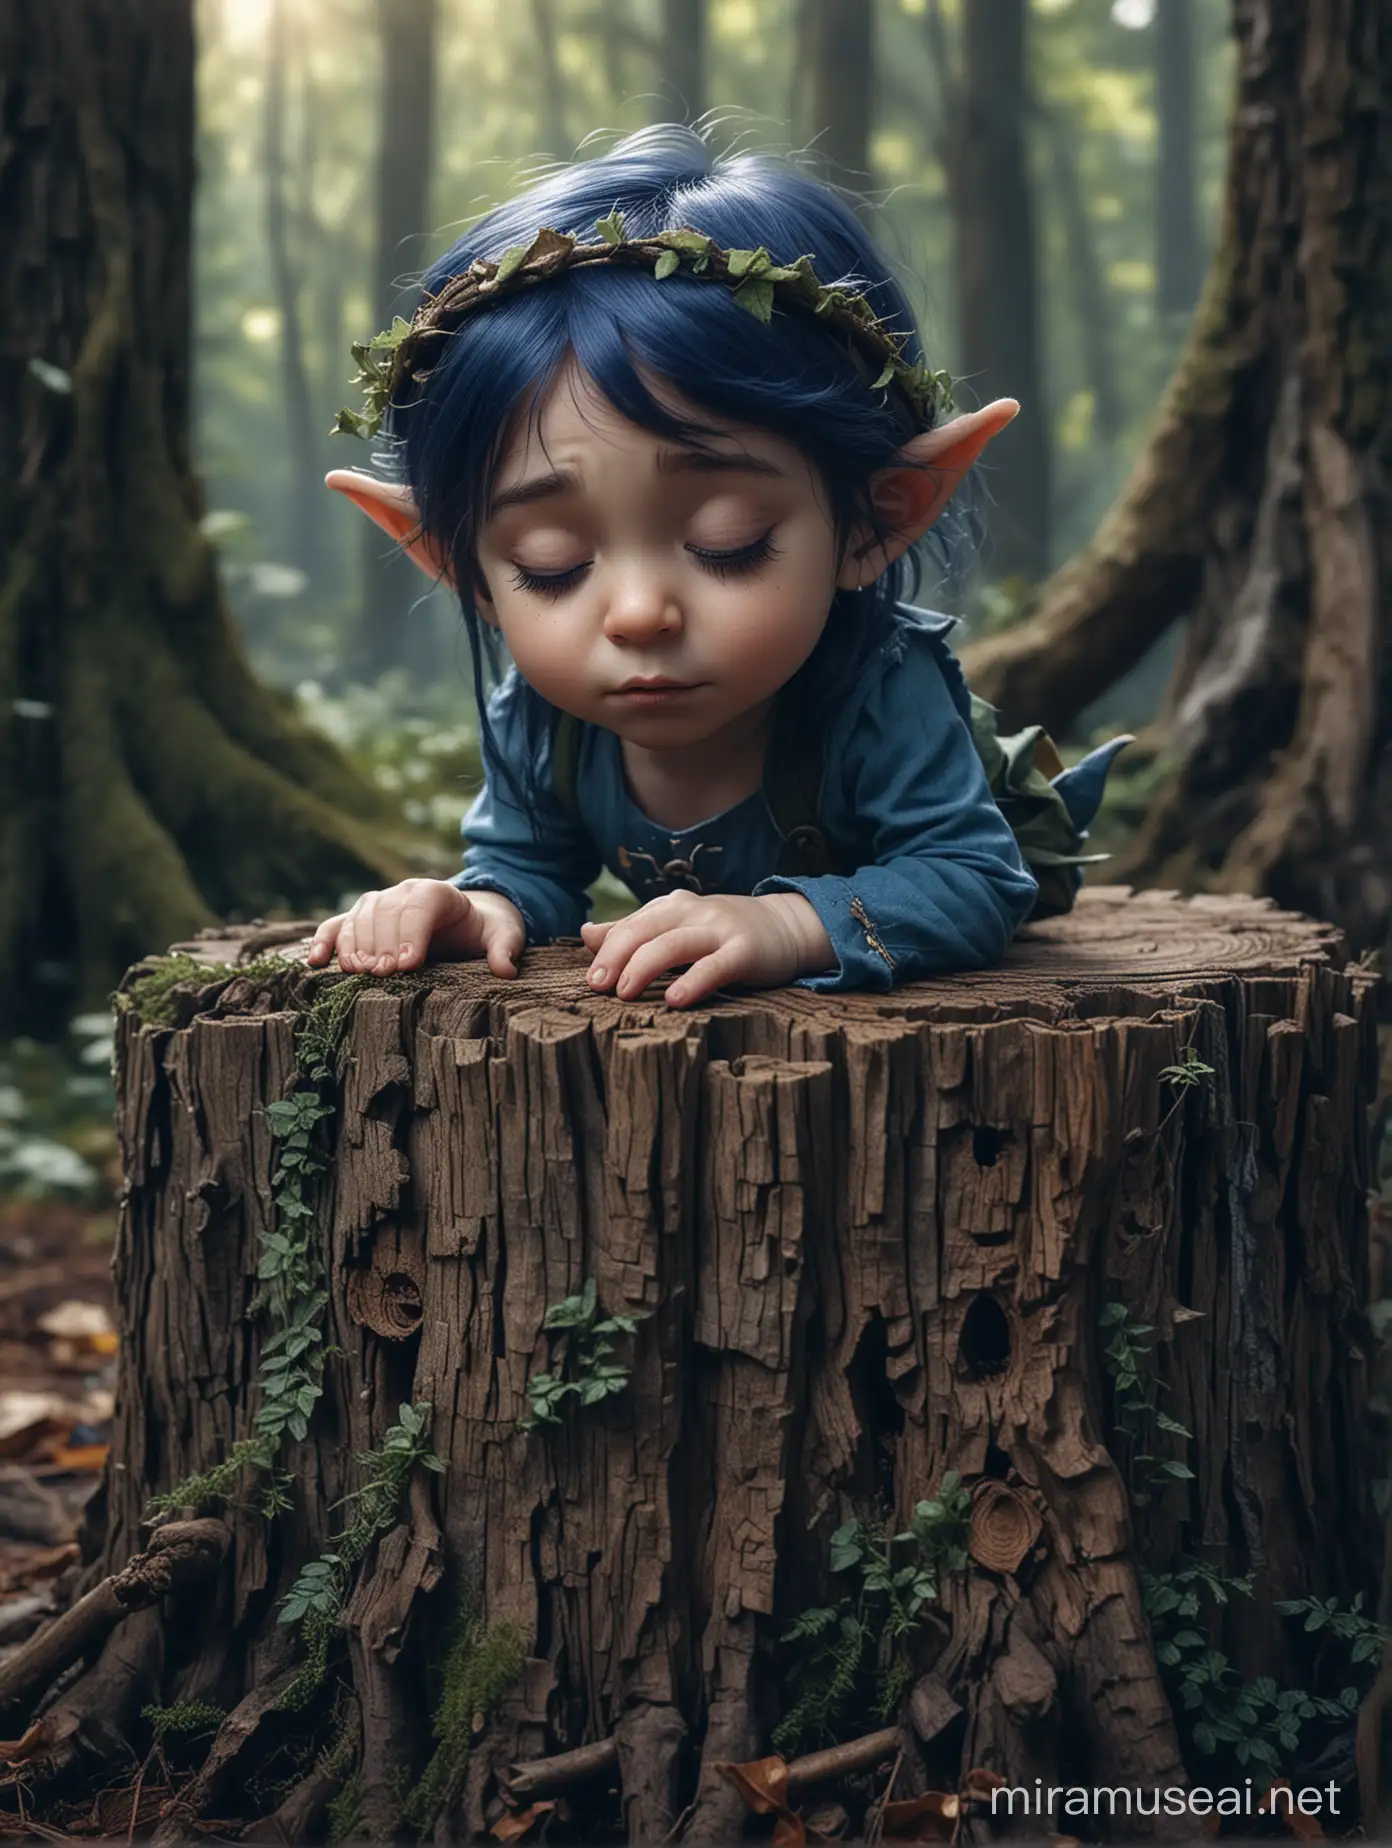 Sulking Elf with Closed Eyes in Enchanted Forest Stump